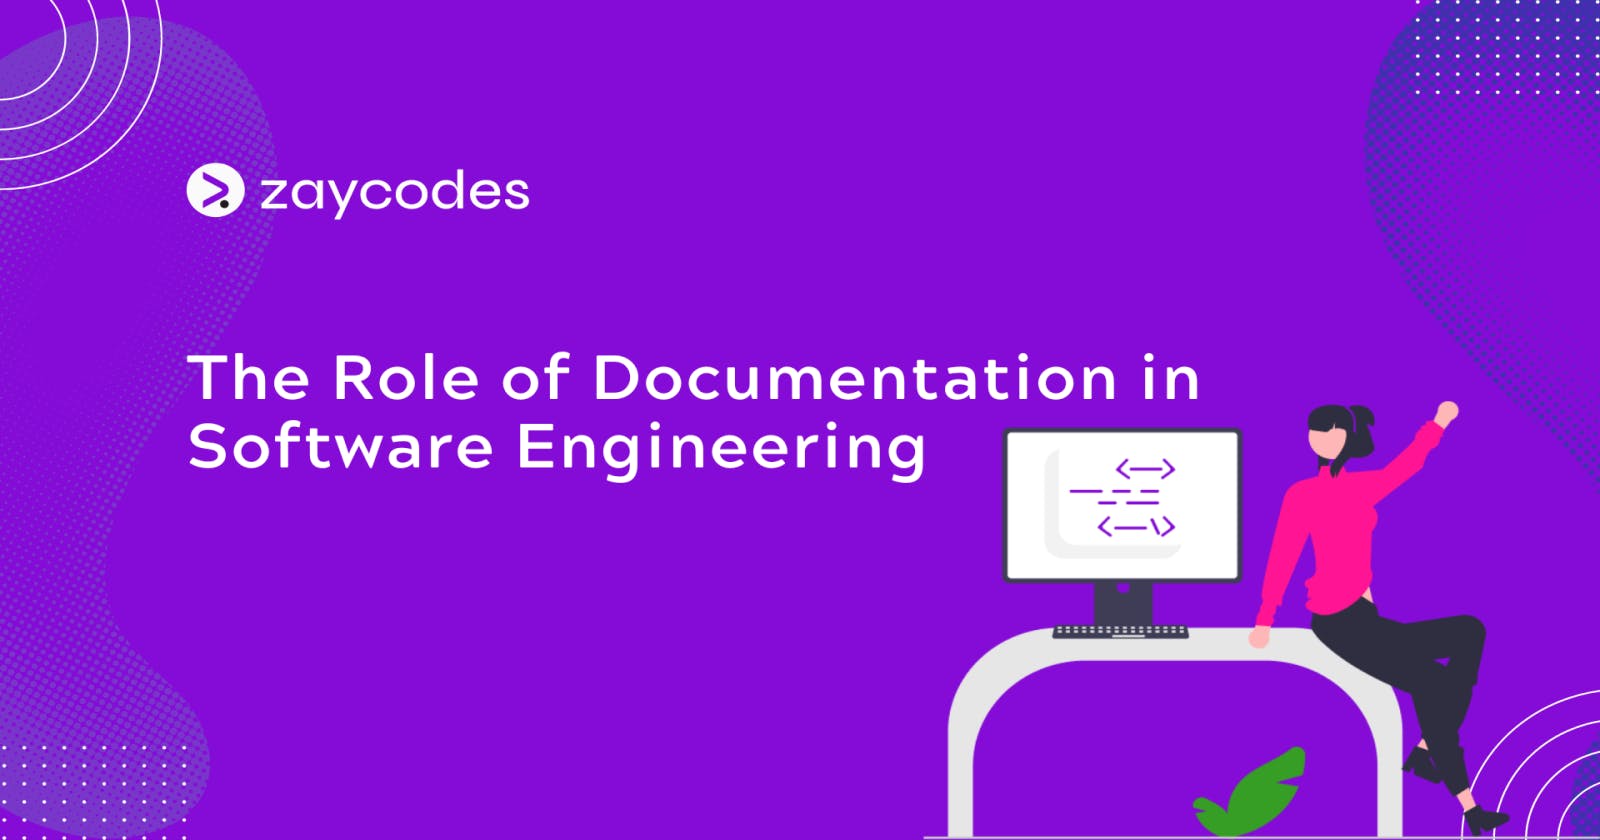 The Role of Documentation in Software Engineering